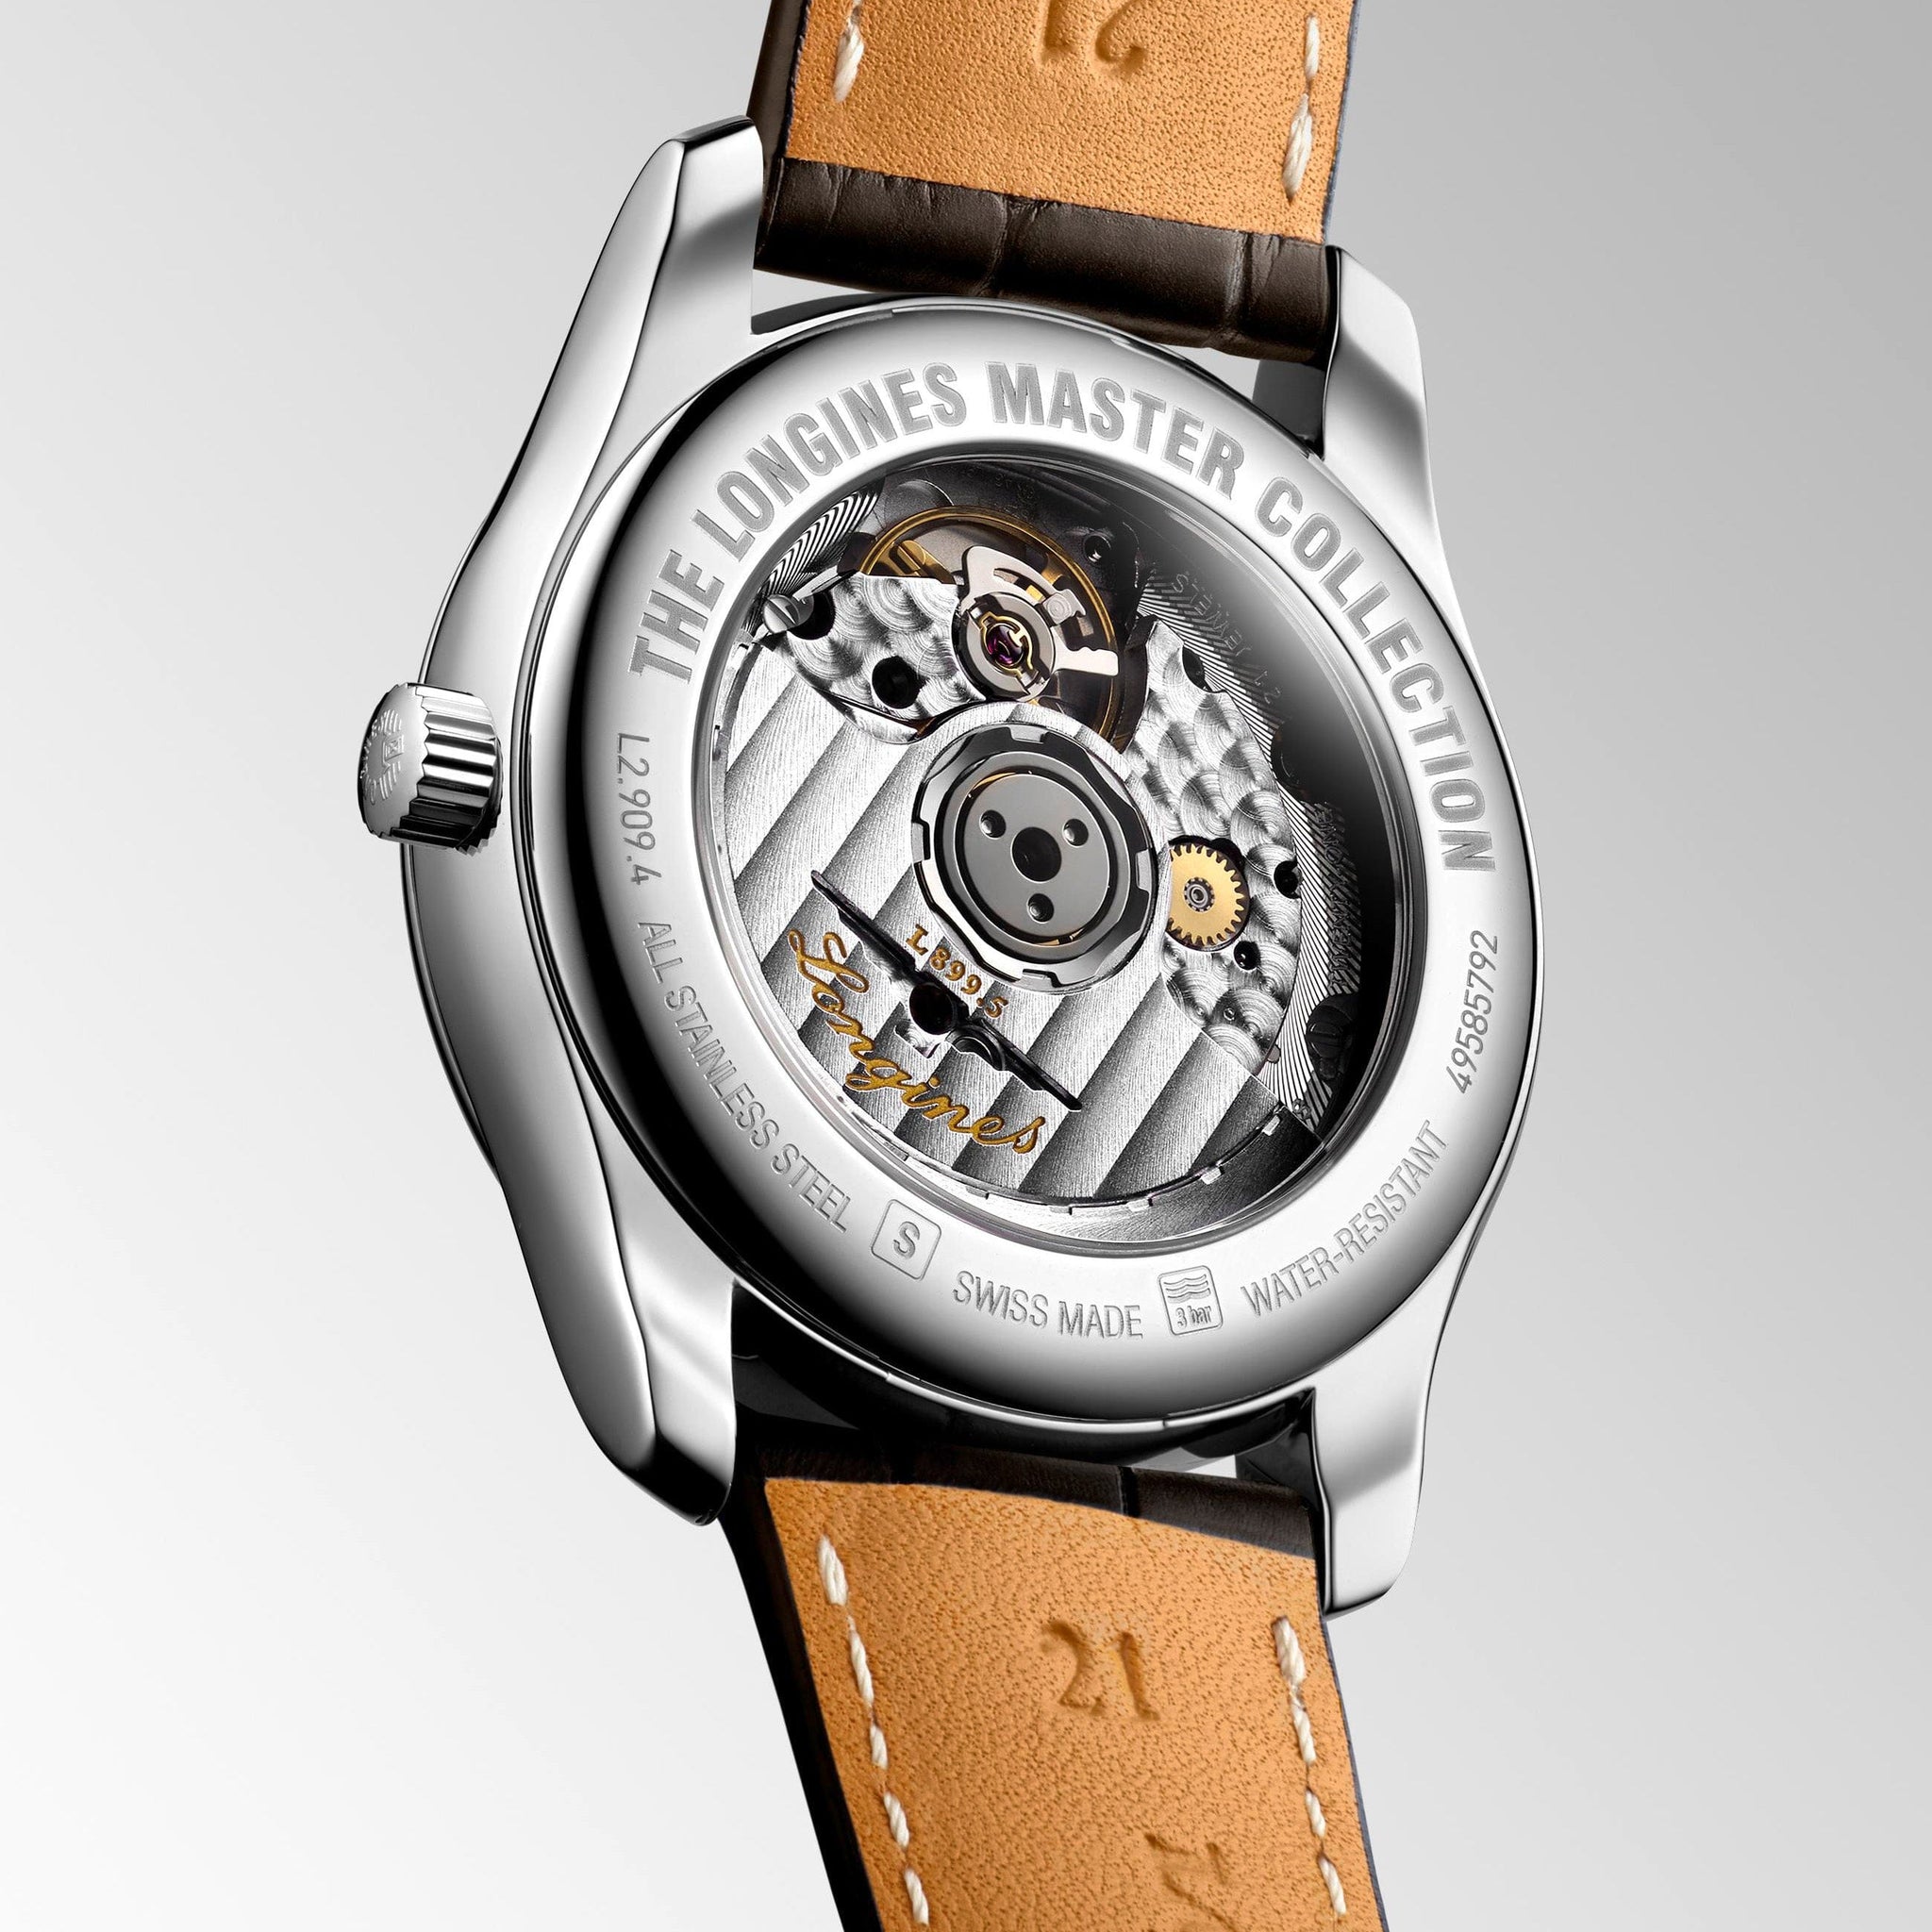 The Longines Master Collection 40mm Automatic, Long's Jewelers